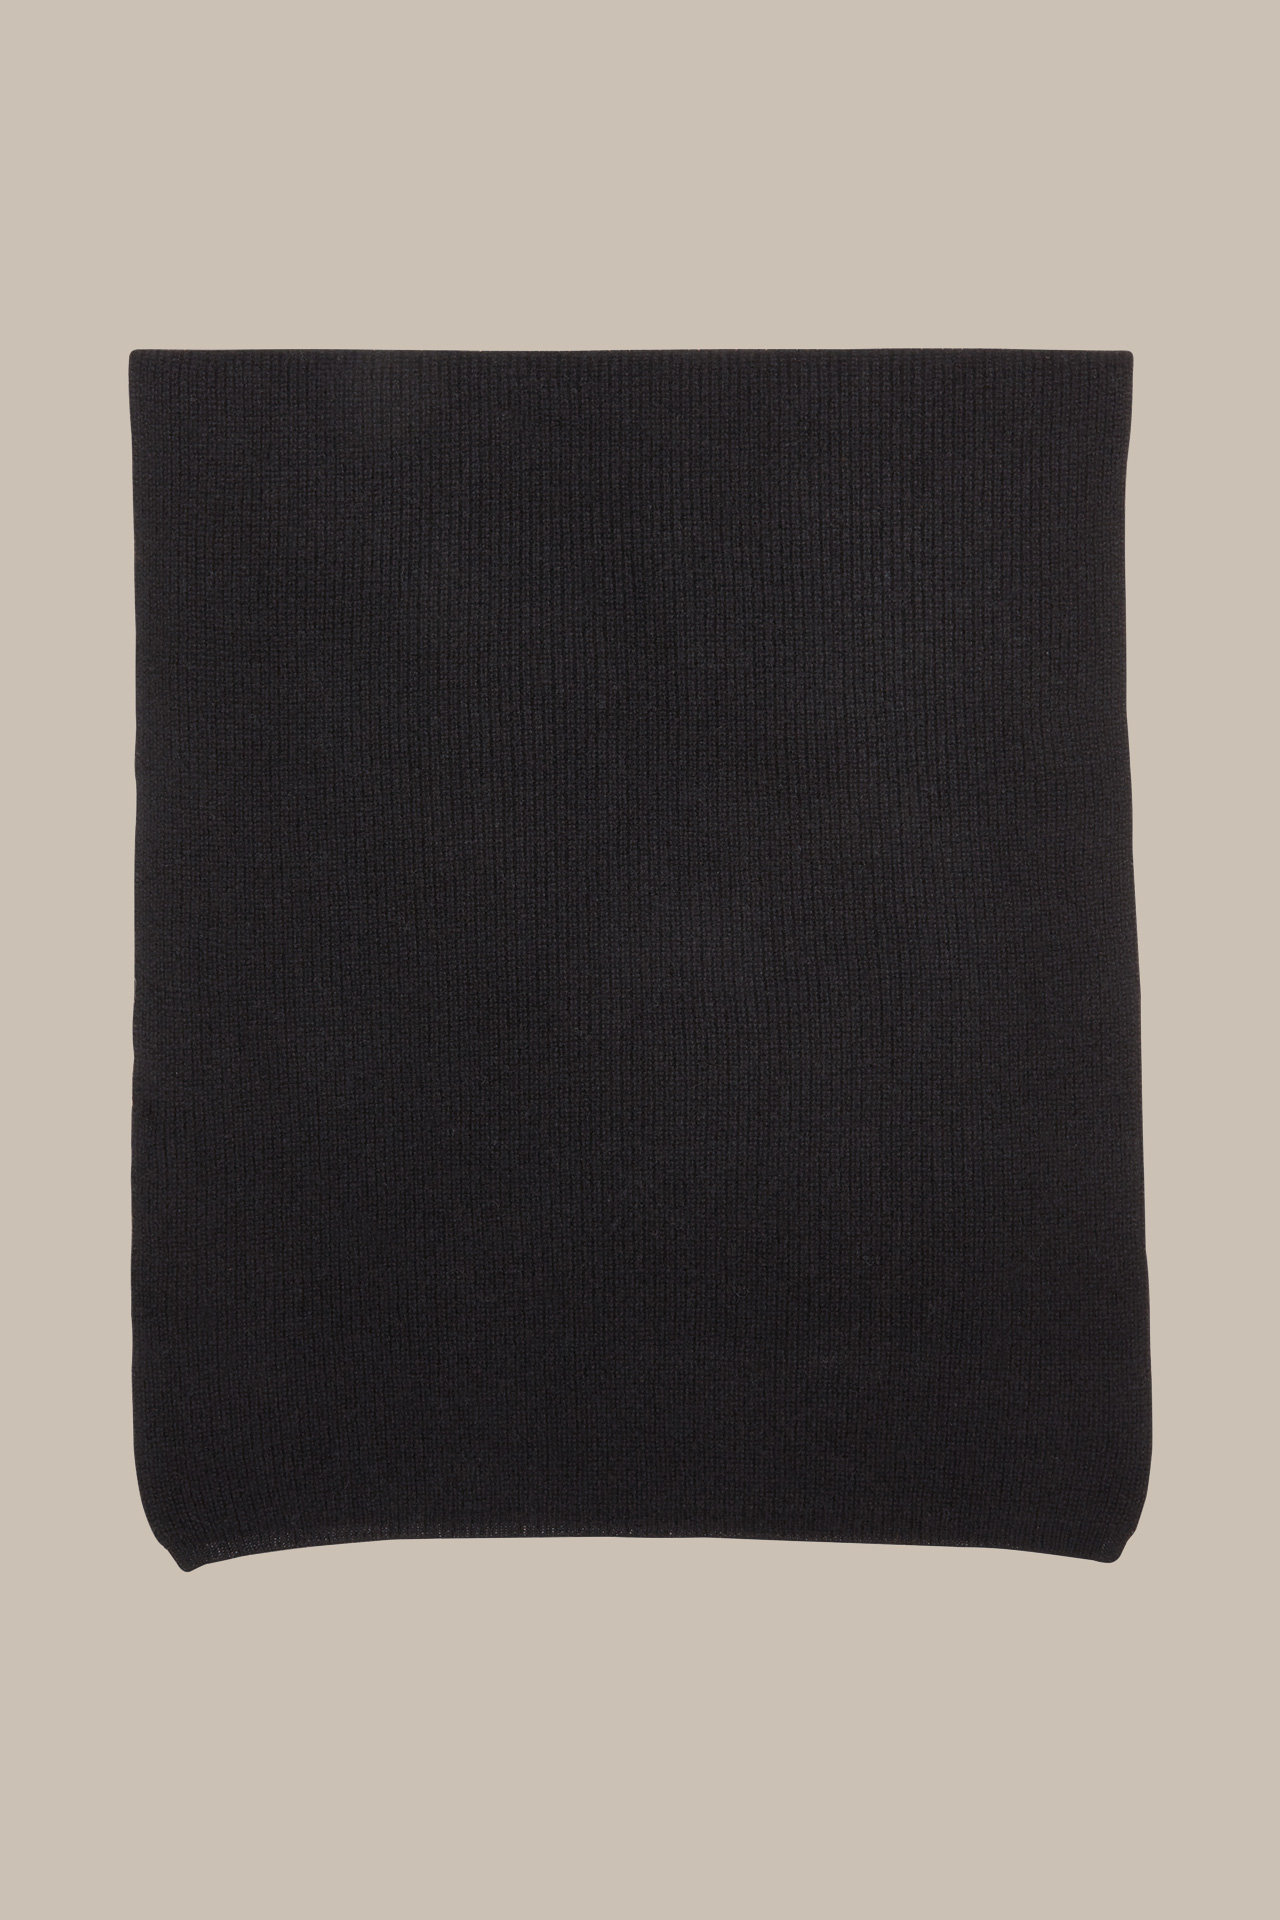 Can Cashmere Scarf in Black